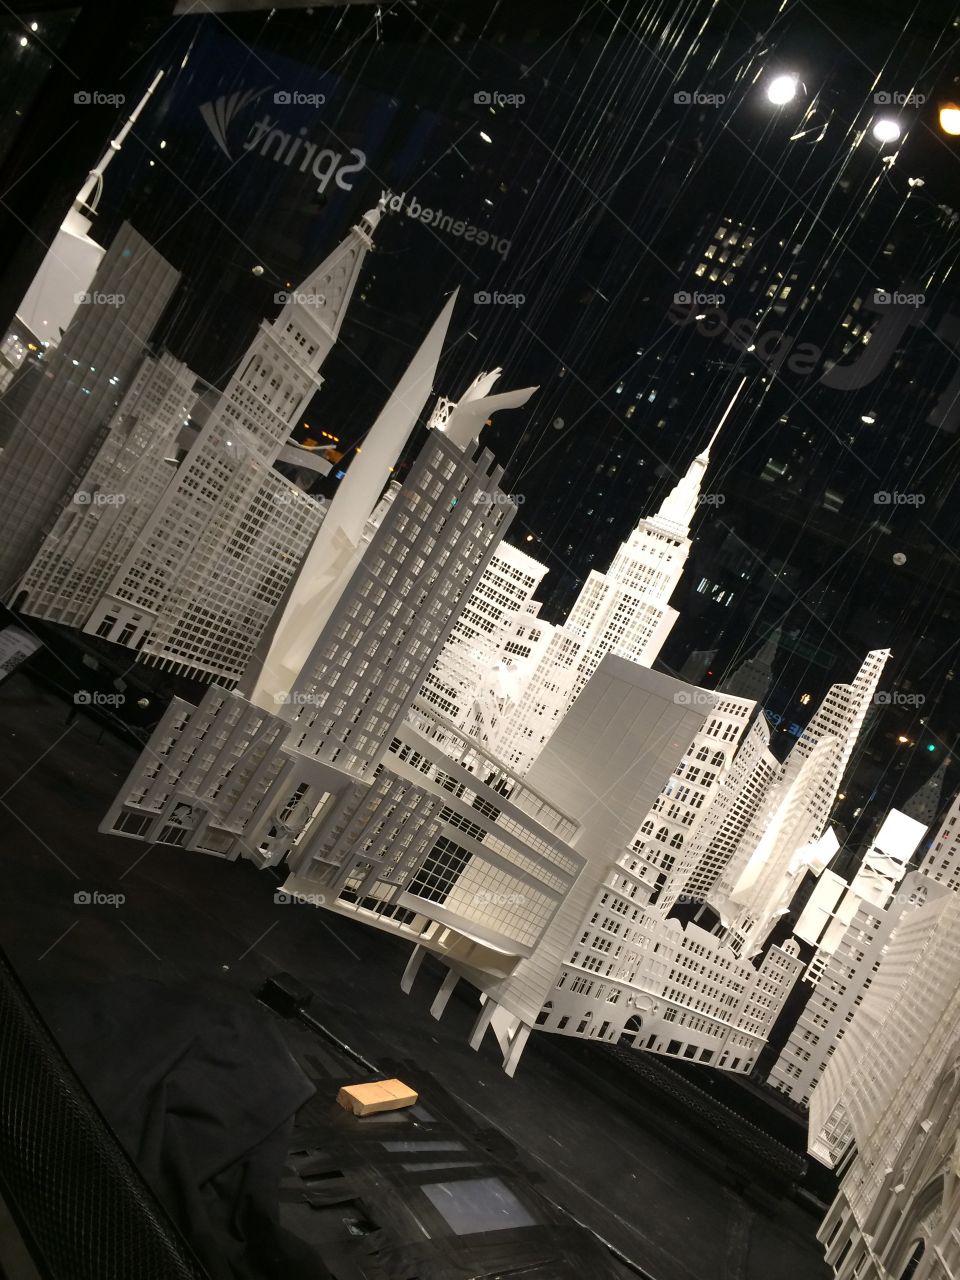 The Sprint Pop Up Store in New York City made a paper city to imitate New York City Skyscrapers 